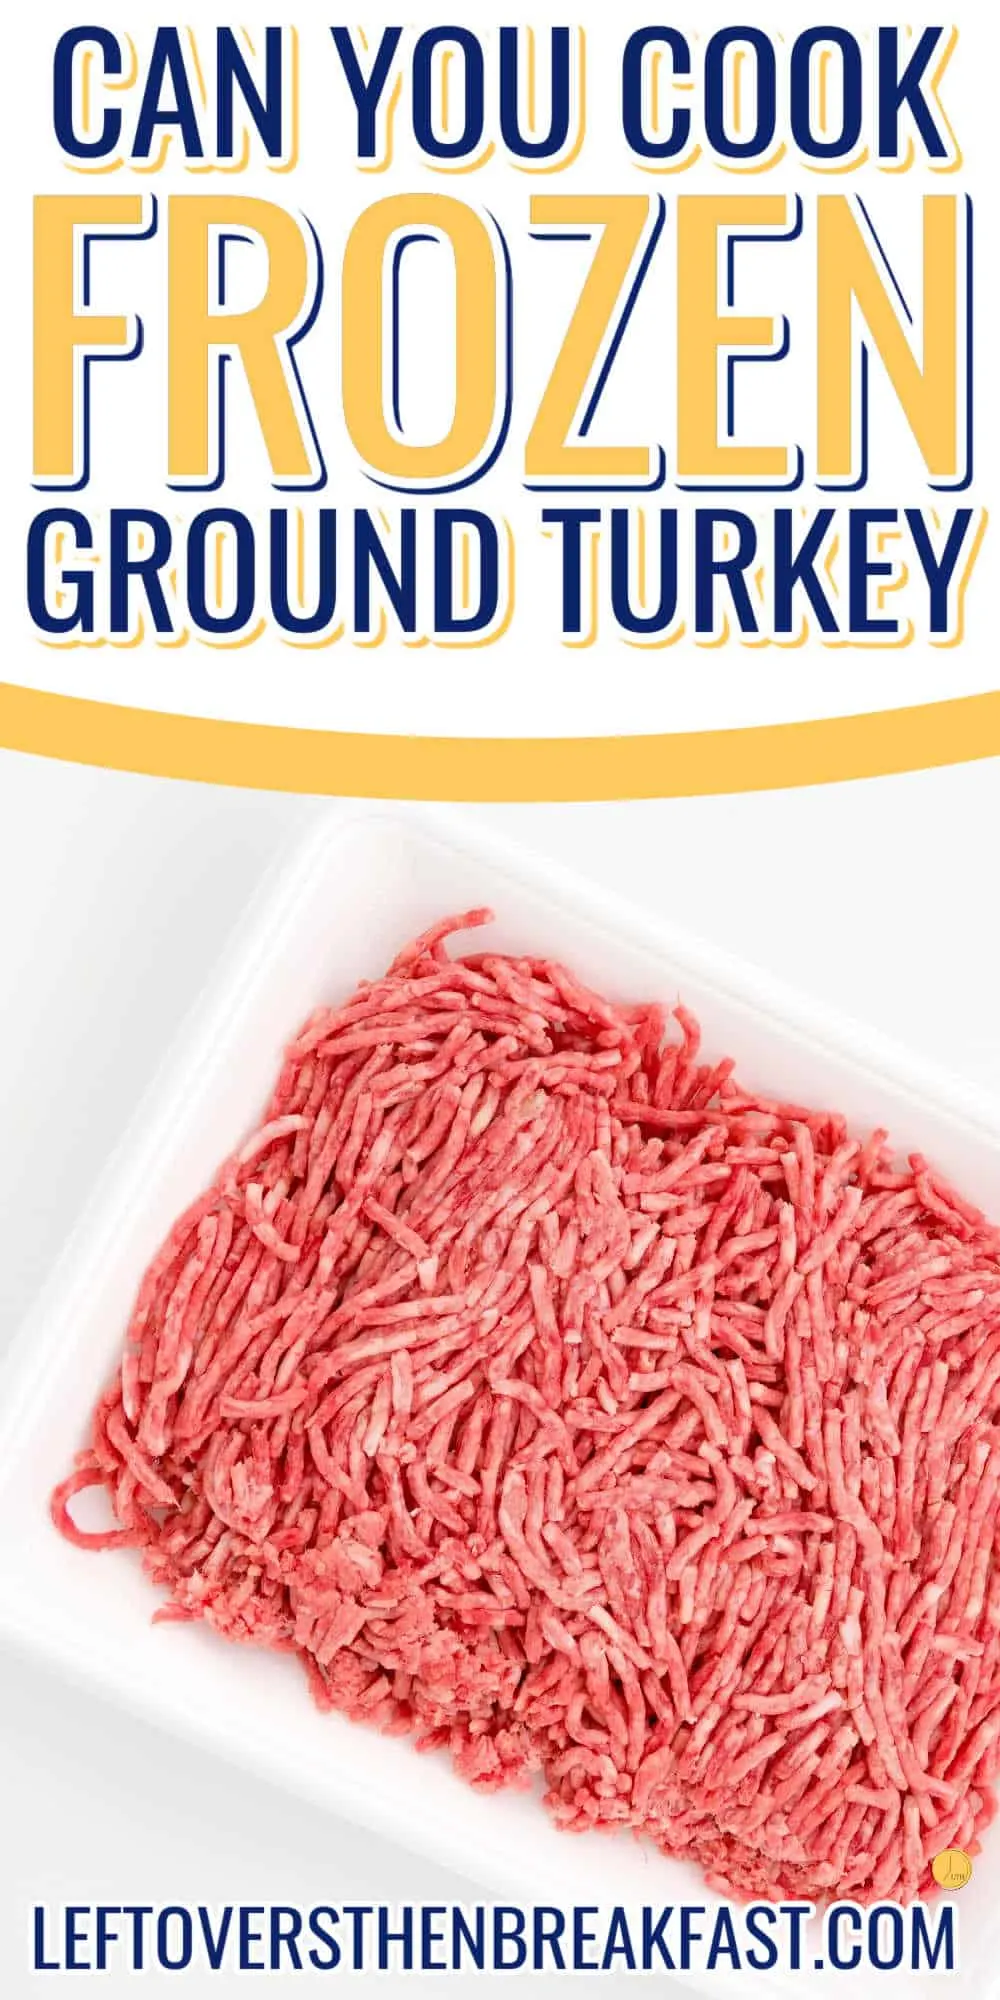 can you cook frozen ground turkey title banner